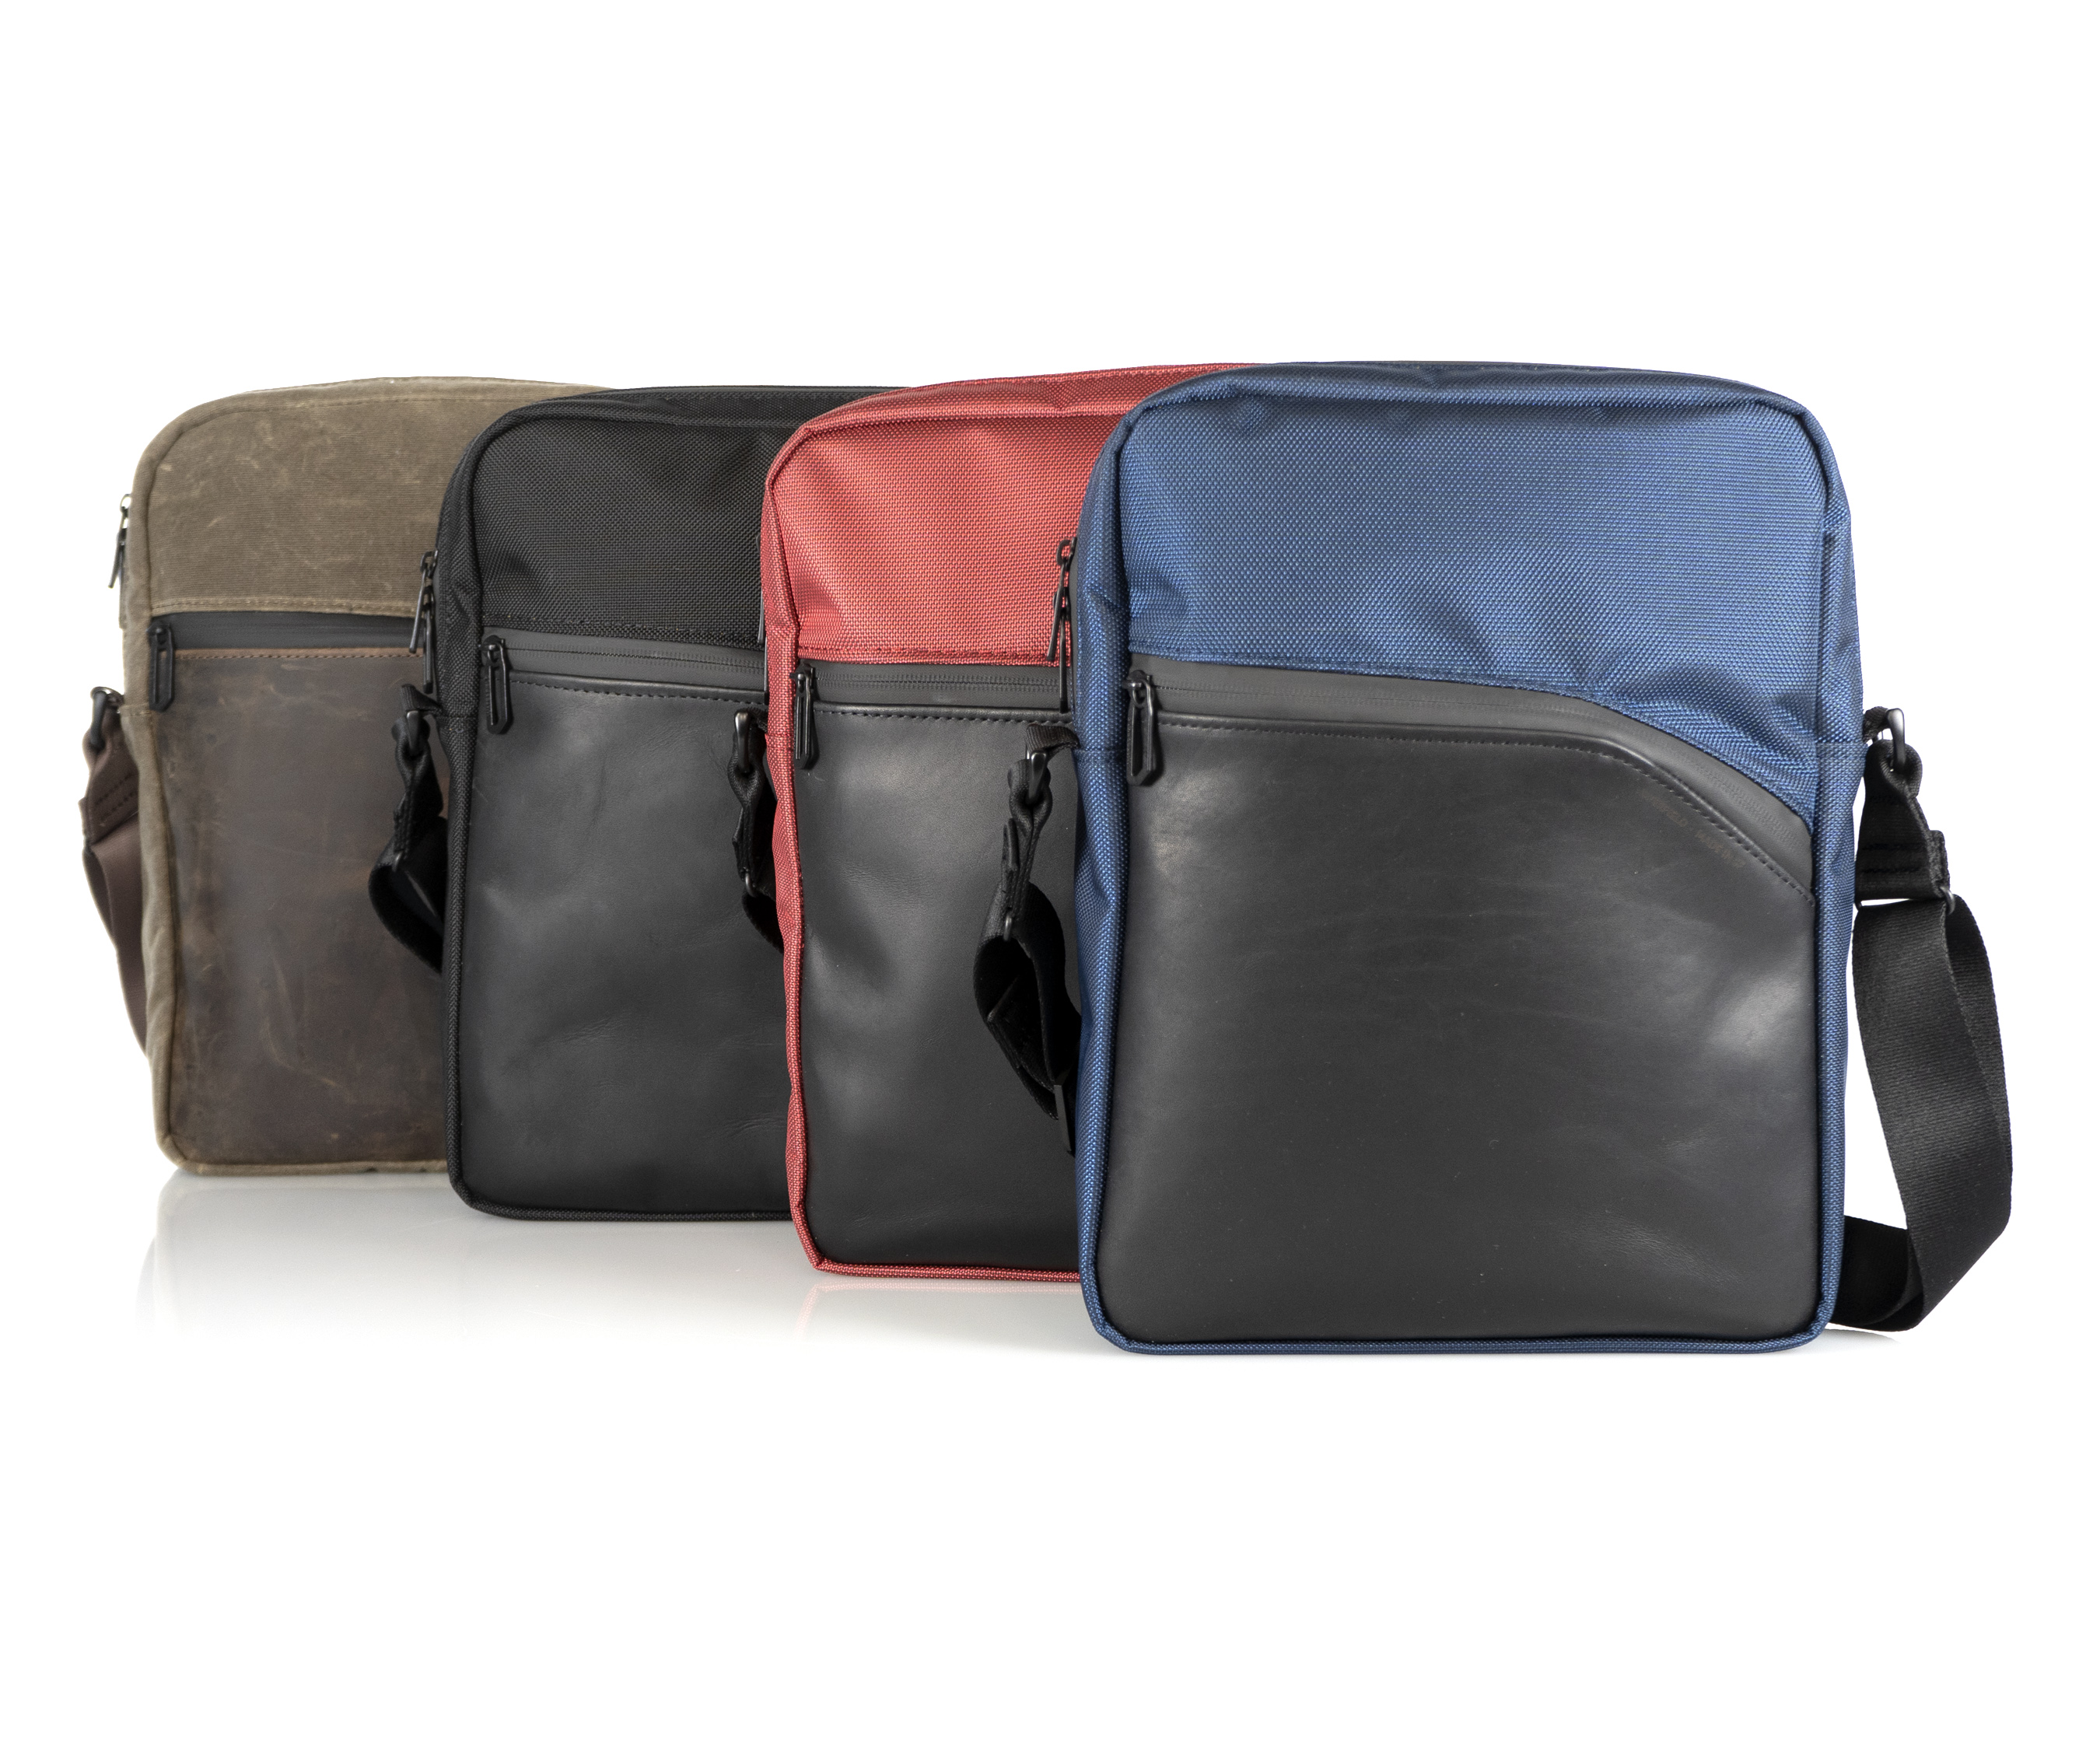 Crossbody bag in multiple color and textile options